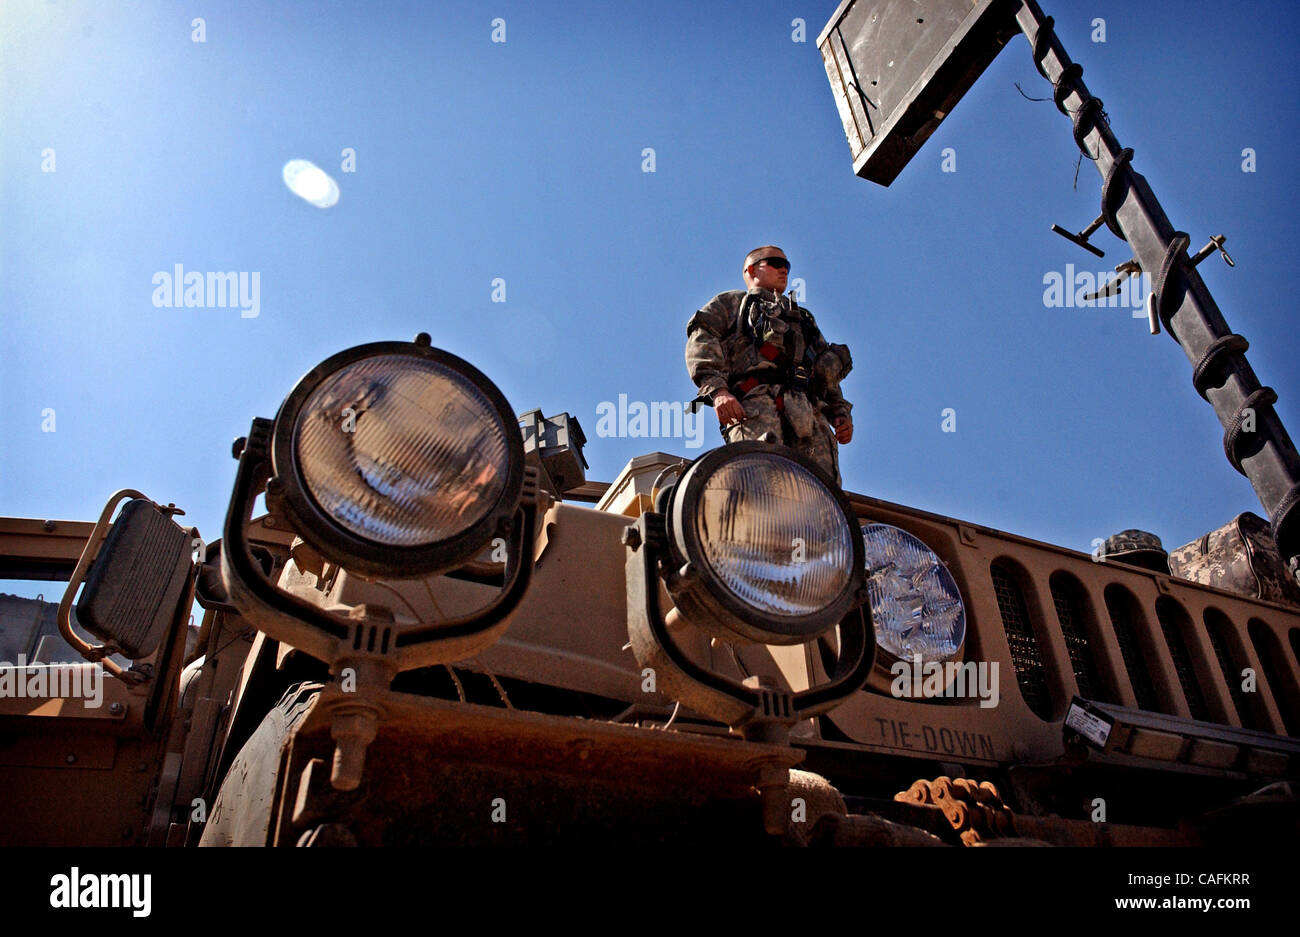 Feb 28, 2008 - Scania, Iraq -  Pfc. DARYL SKELLEY, of the 3rd Battalion, 319th Airborne Field Artillery Regiment, stands atop his Humvee at Scania as he waits for the convoy to move out on its last leg of their trip to Camp Adder in Southern Iraq.  The 82nd's 1st Brigade Combat Team's mission is to  Stock Photo